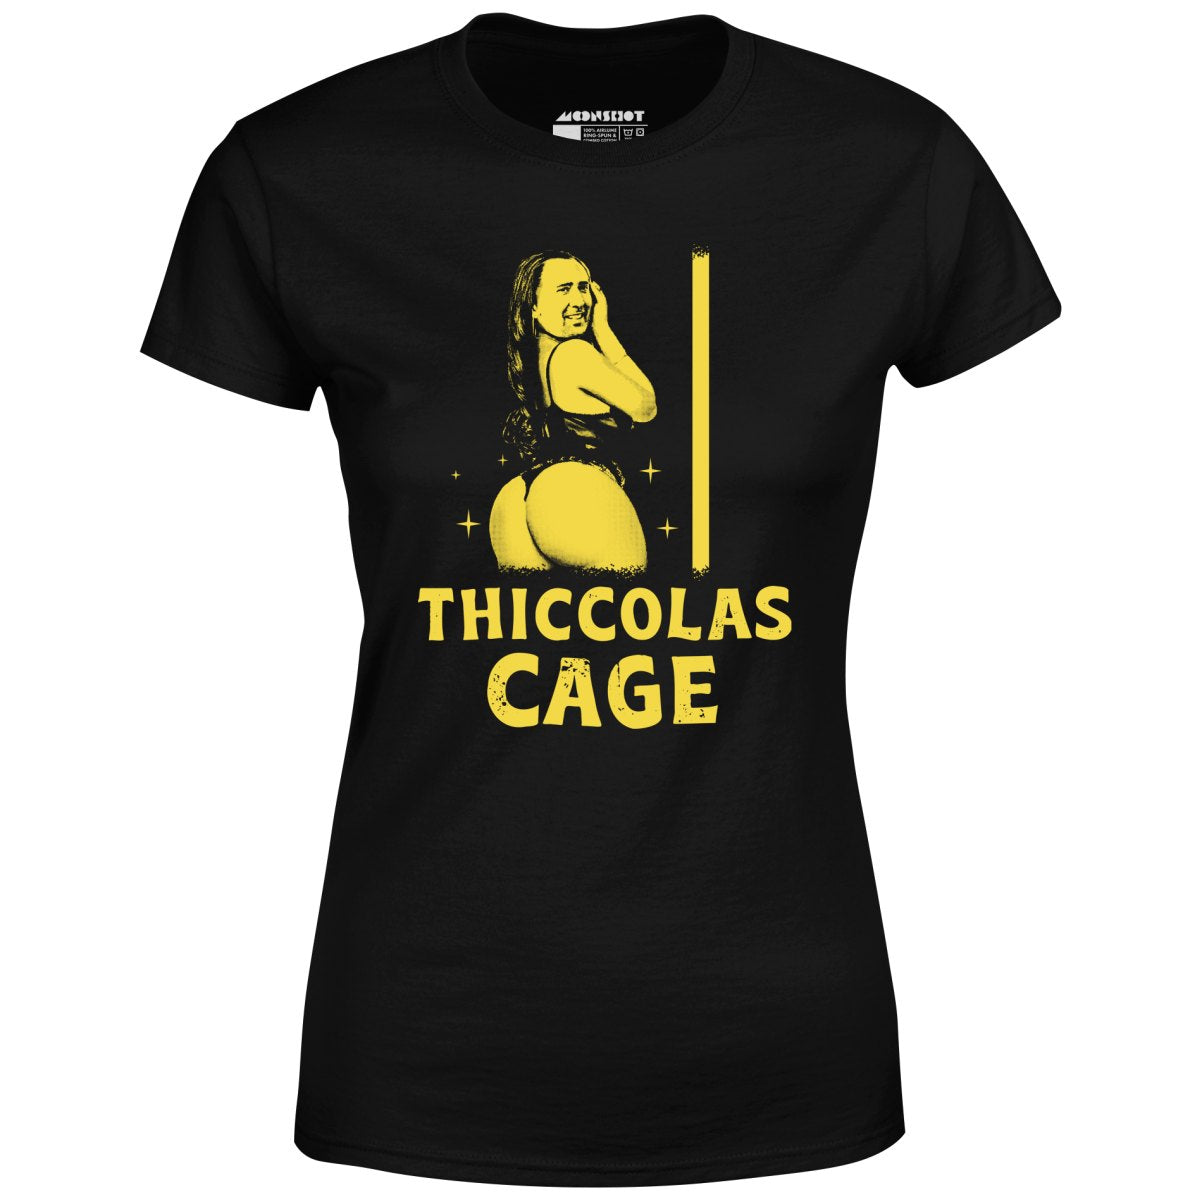 Thiccolas Cage - Women's T-Shirt